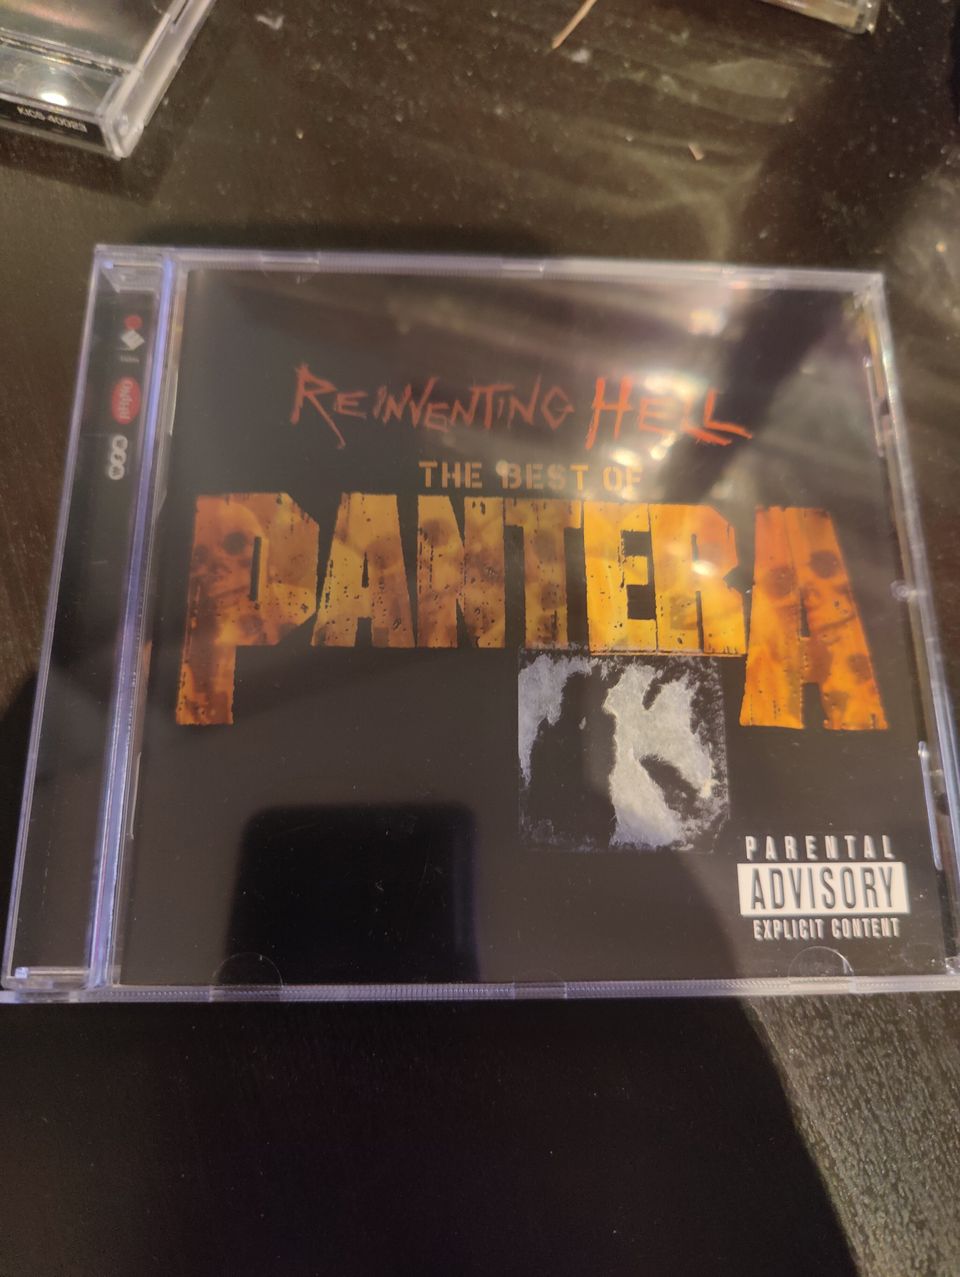 Pantera Rementing Hell The best of kuin uusi